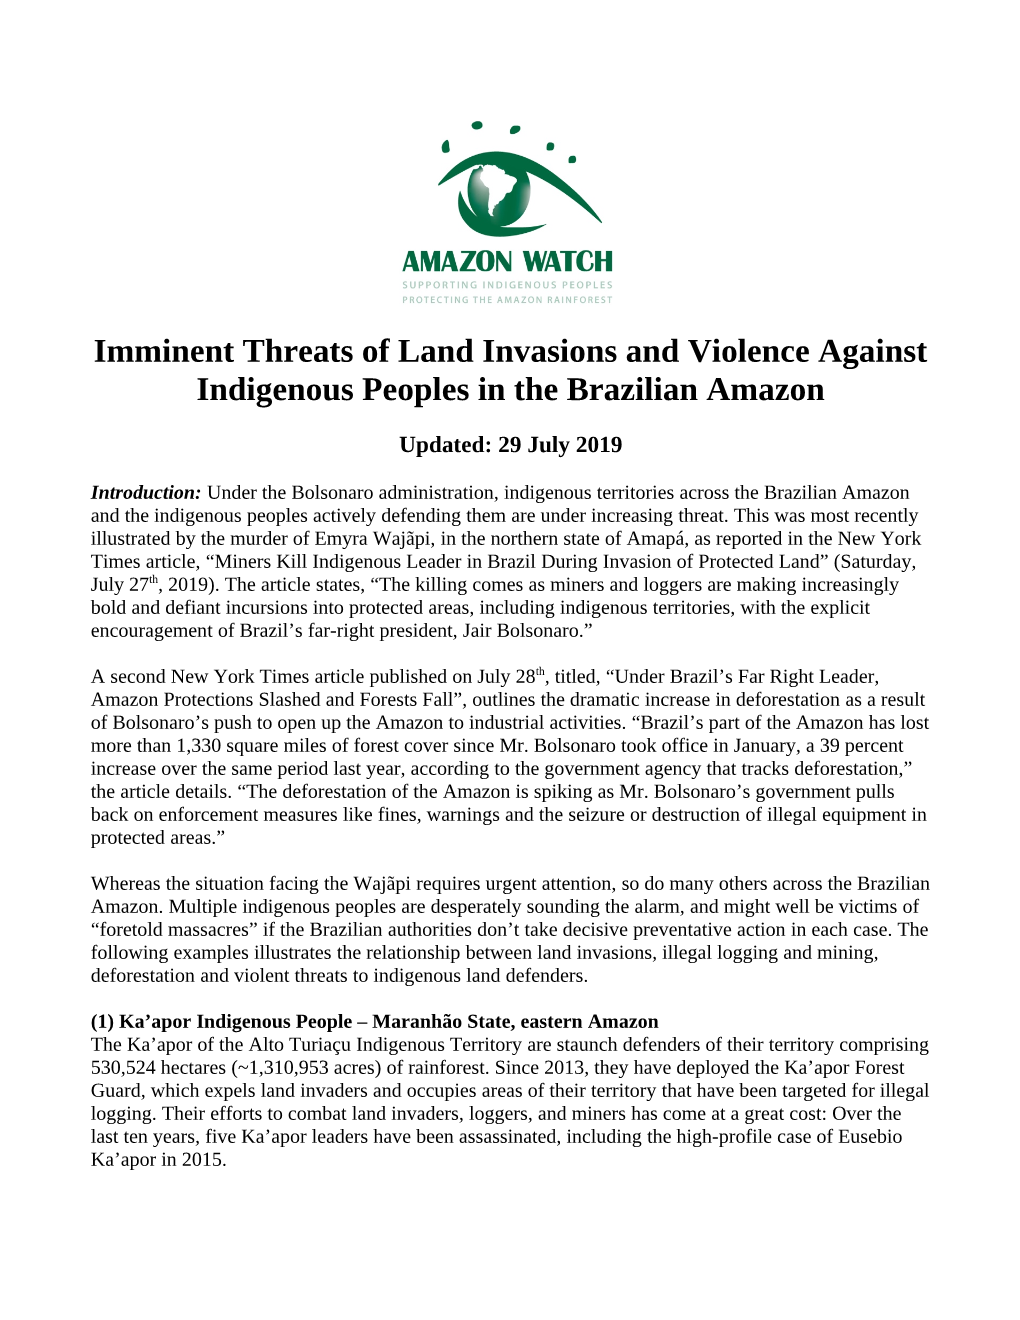 Imminent Threats of Land Invasions and Violence Against Indigenous Peoples in the Brazilian Amazon